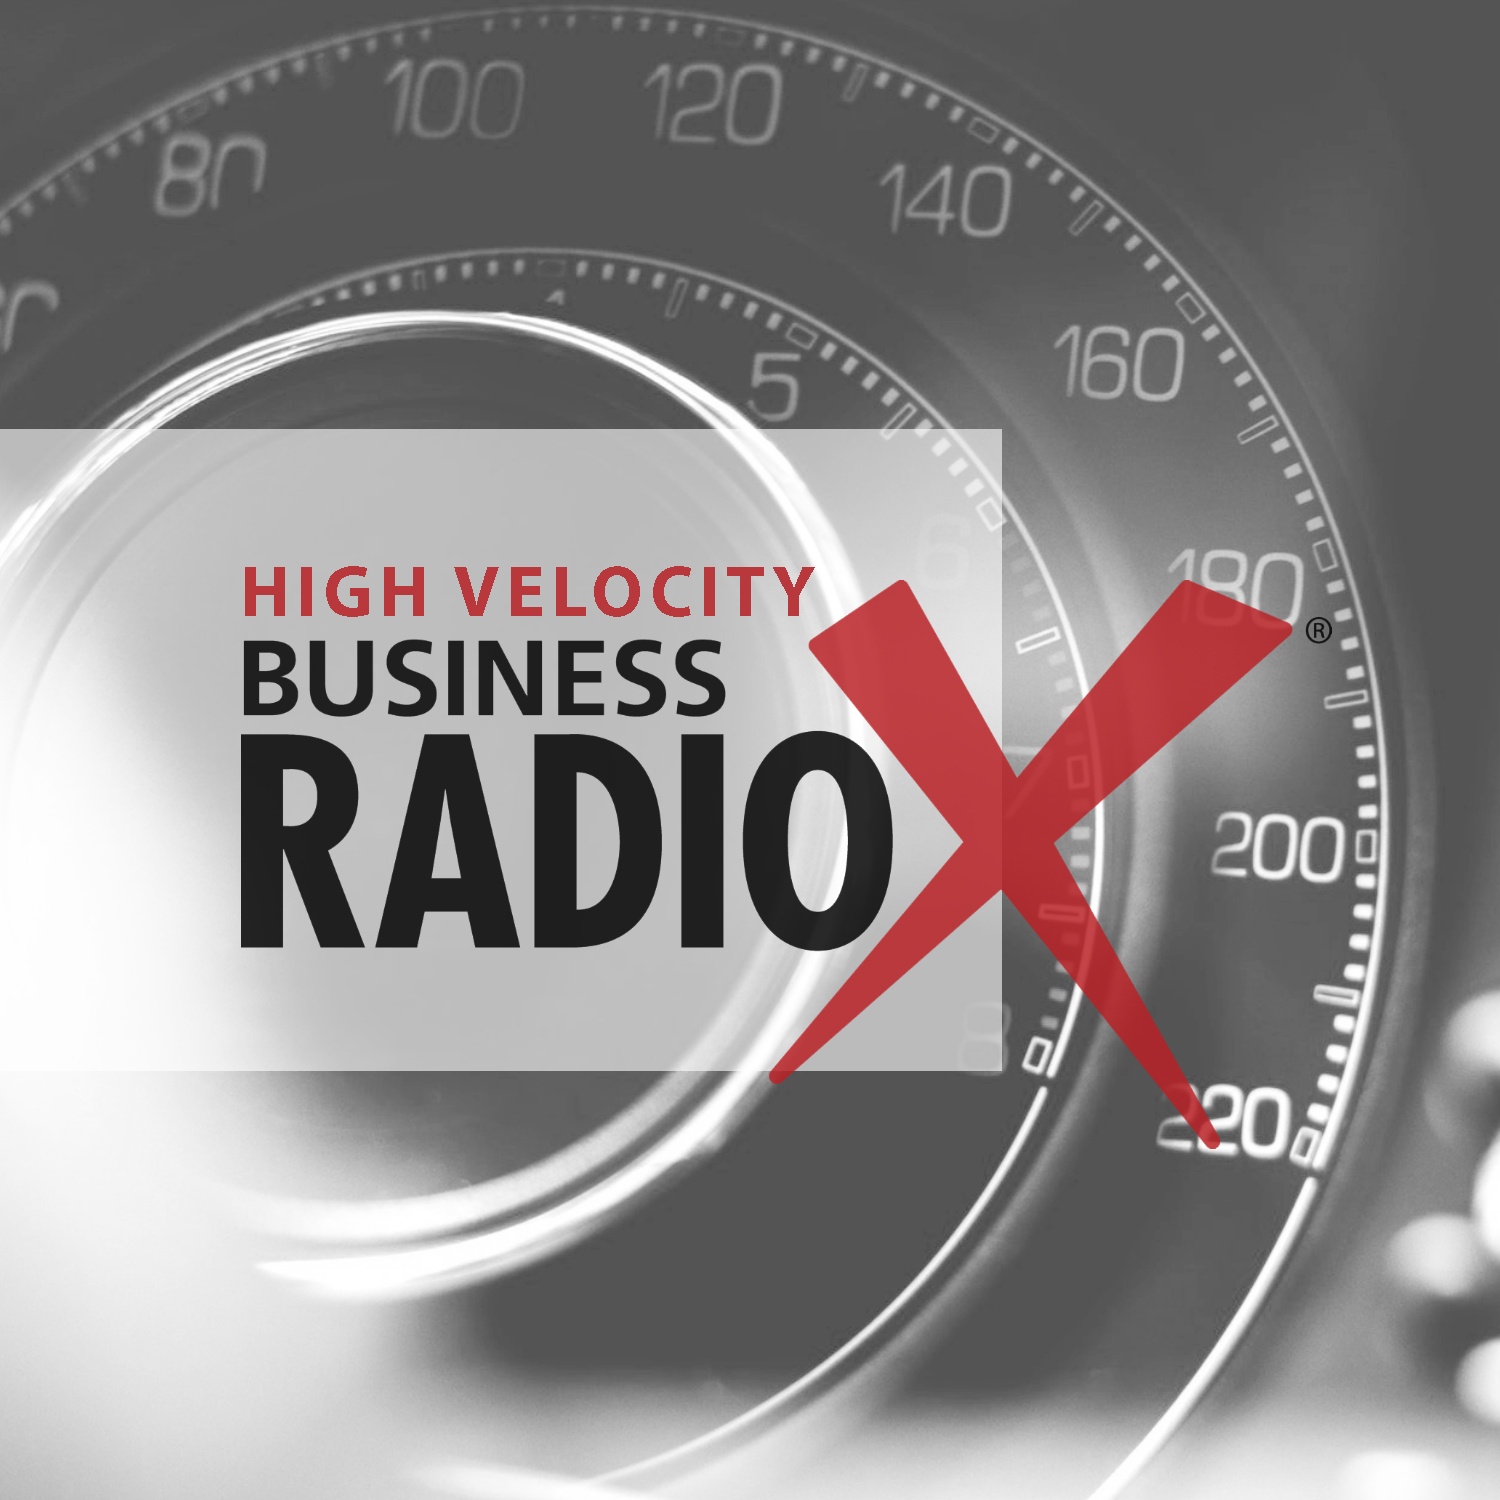 High Velocity Radio Interviews Sean Cook, J.T. Hroncich, Debbie Qaqish, Jalal Roy, and Dave McMullen